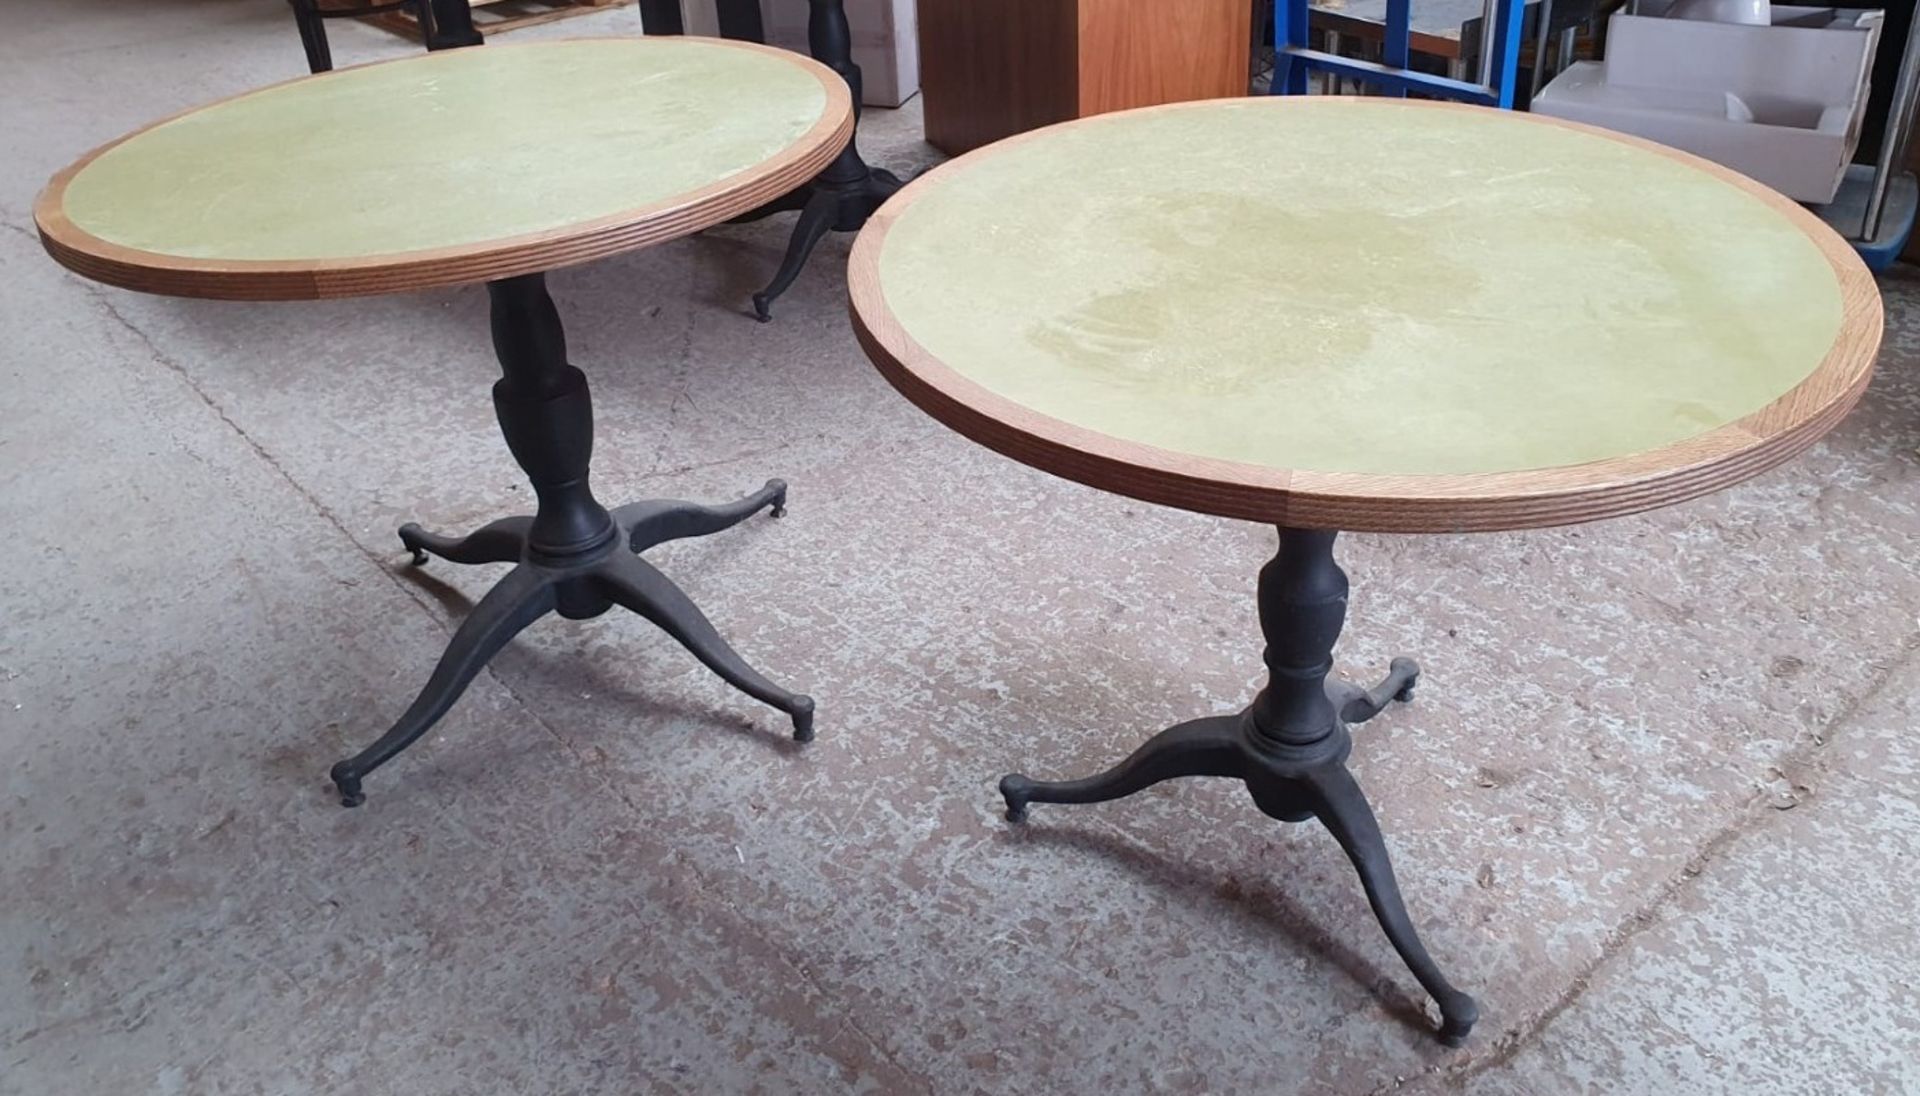 2 x Large Round Bistro Restaurant Tables With Green Faux Leather Inserts And Three-Legged Bases